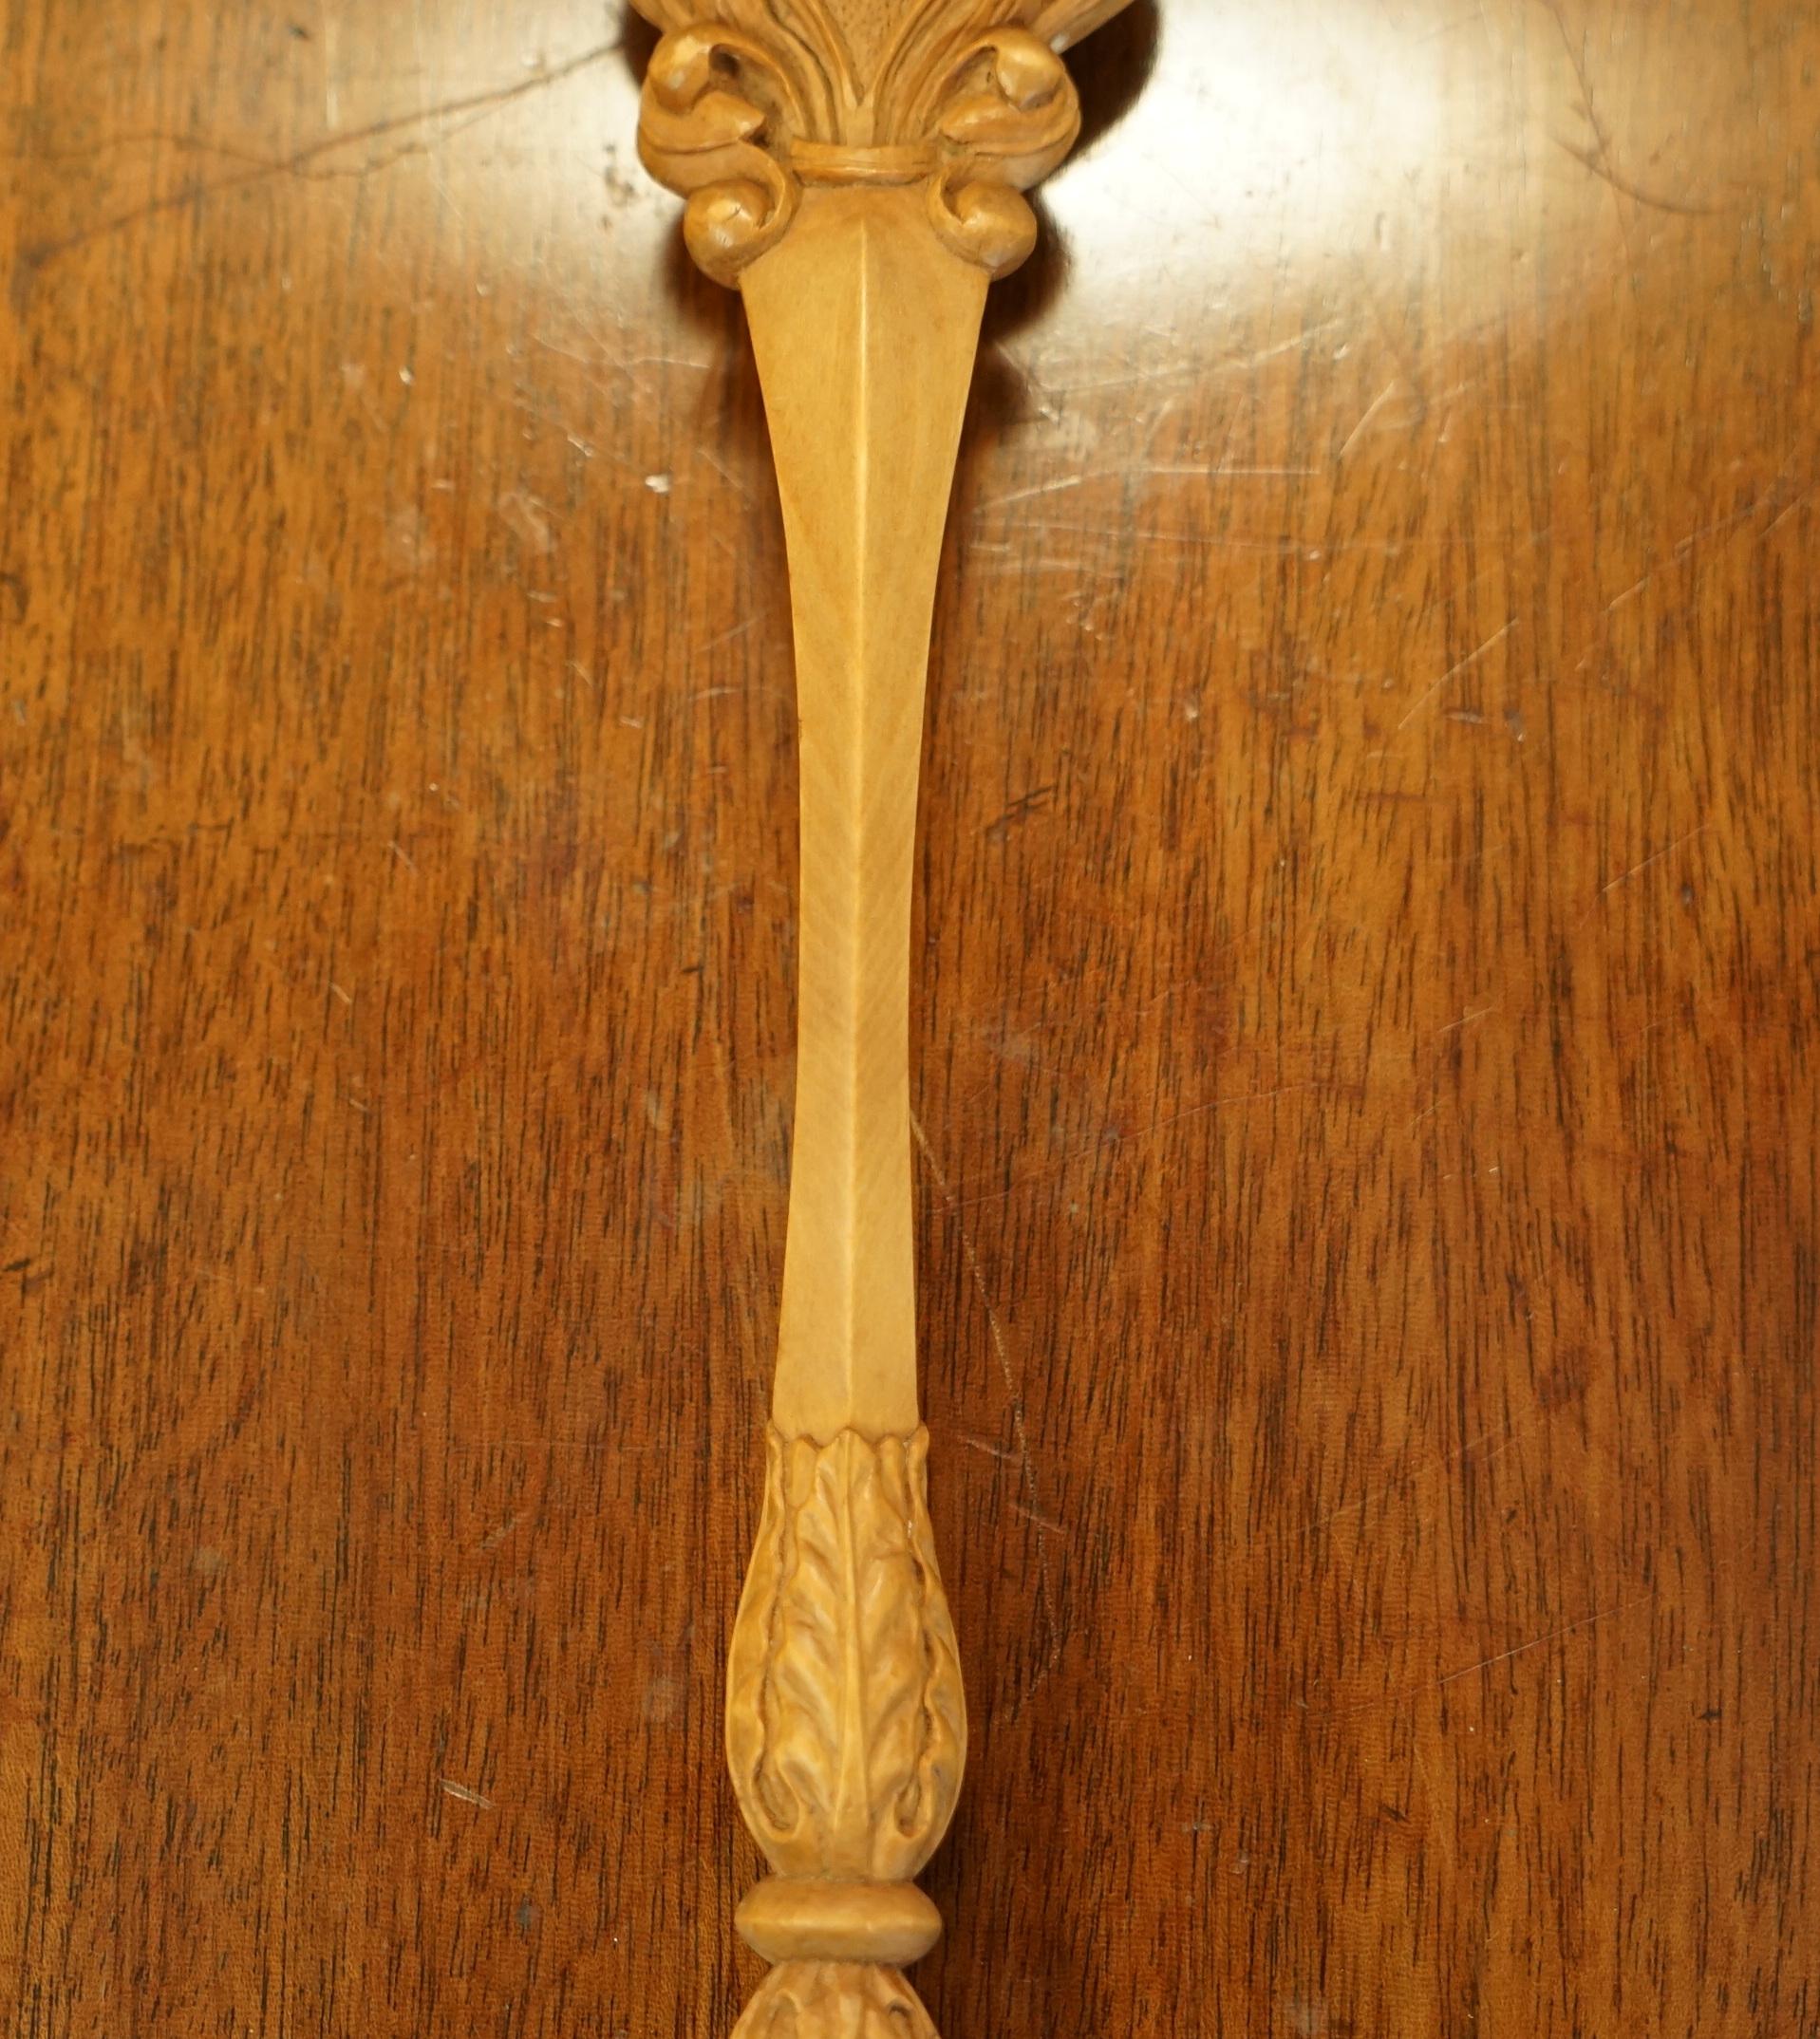 ANTIQUE HAND CARVED CIRCA 1900 ROYAL ALBERT HALL RETIREMENT GiFT FORK & SPOON 11